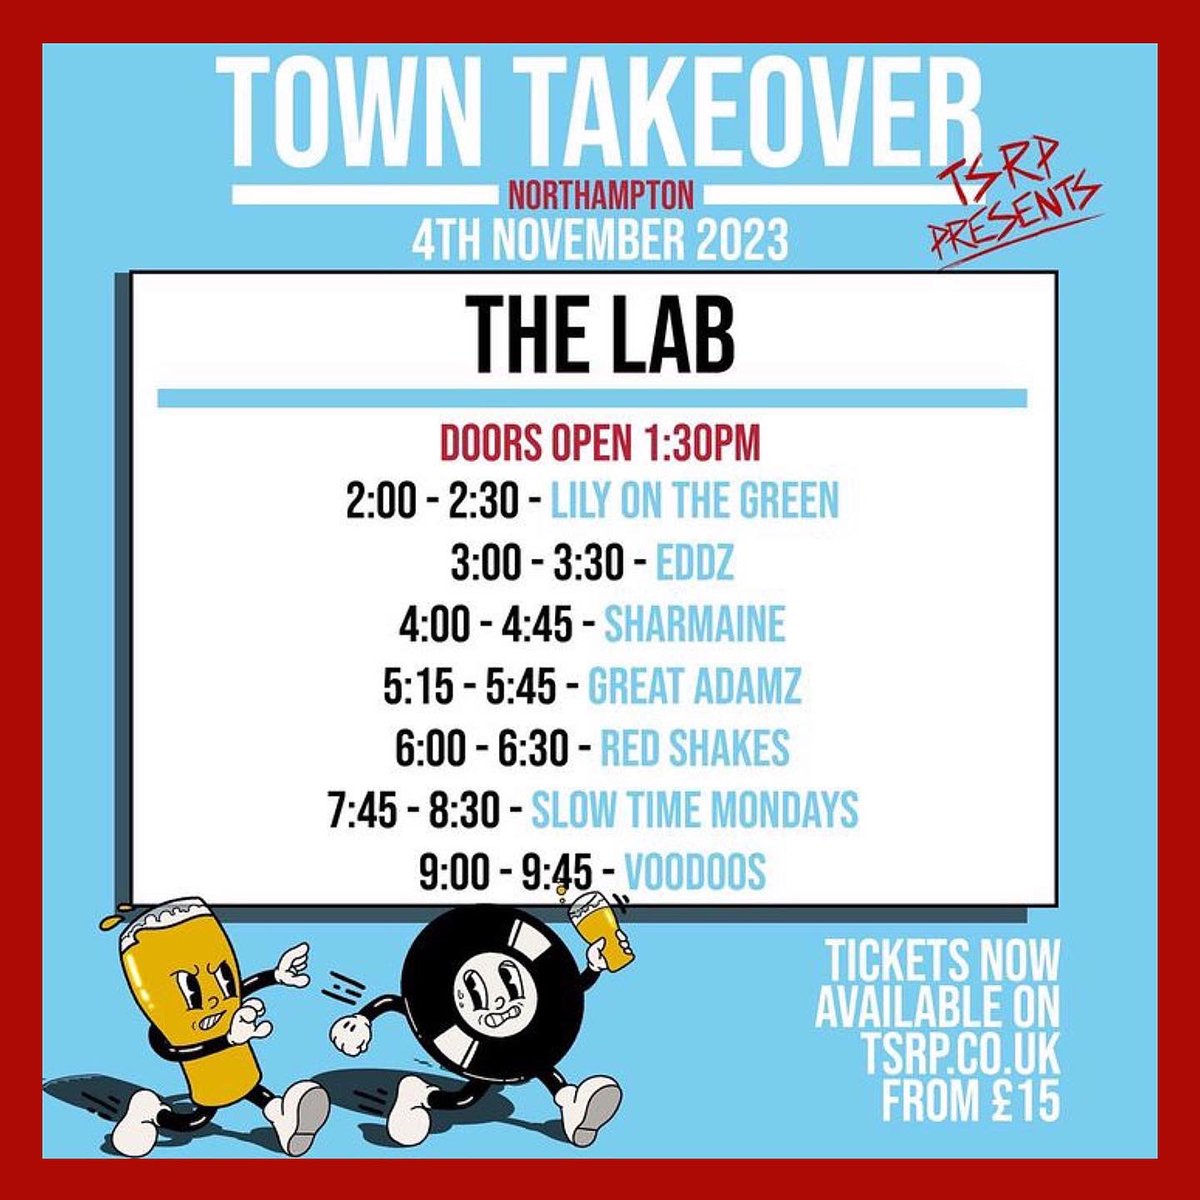 We absolutely can’t wait for this show, playing with so many great bands and artists! Northampton we’ll see you early this evening at The Lab stage! ❤️